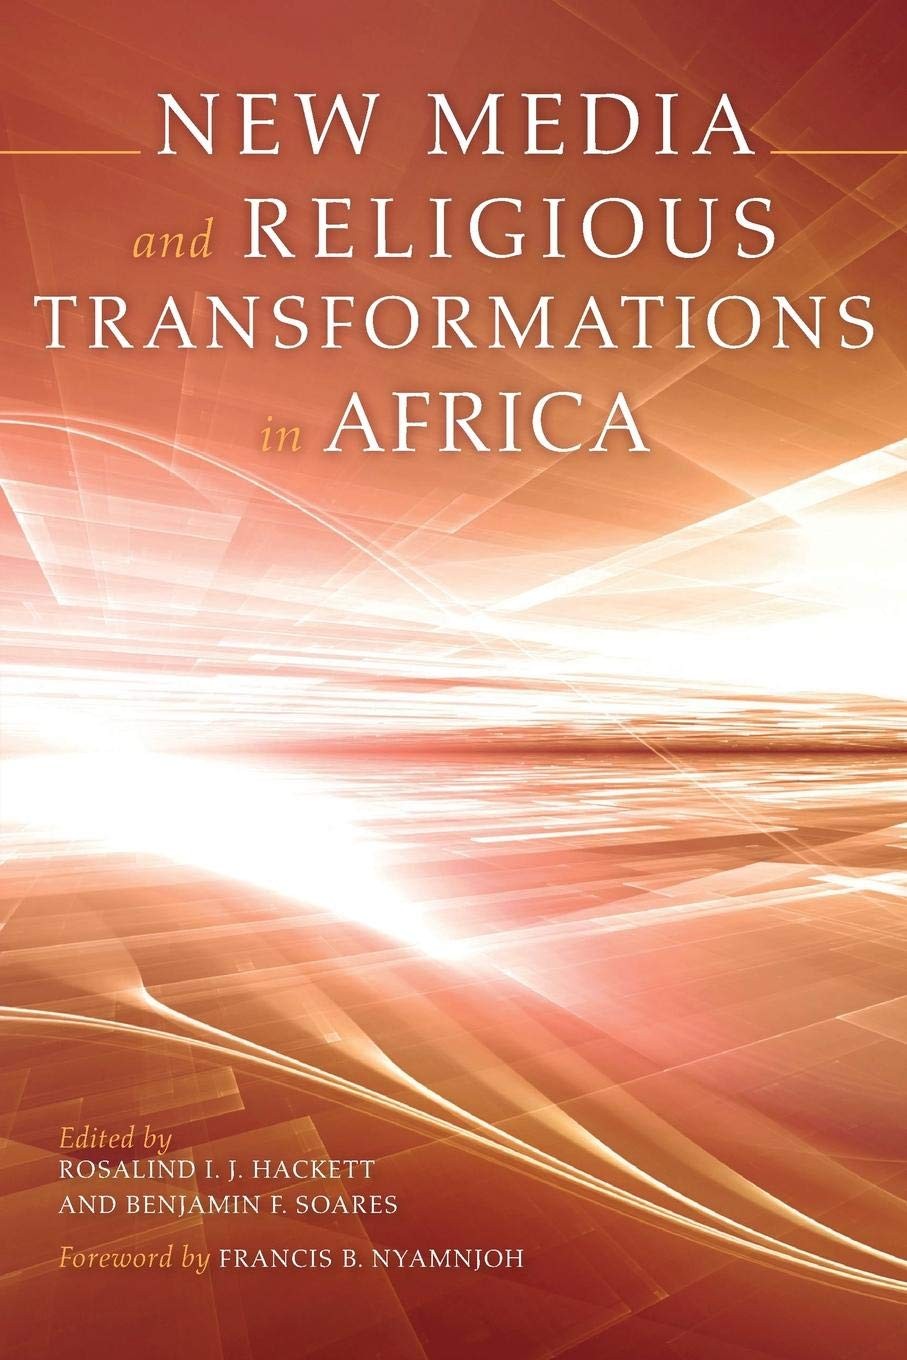 Book Cover: New Media and Religious Transformations in Africa